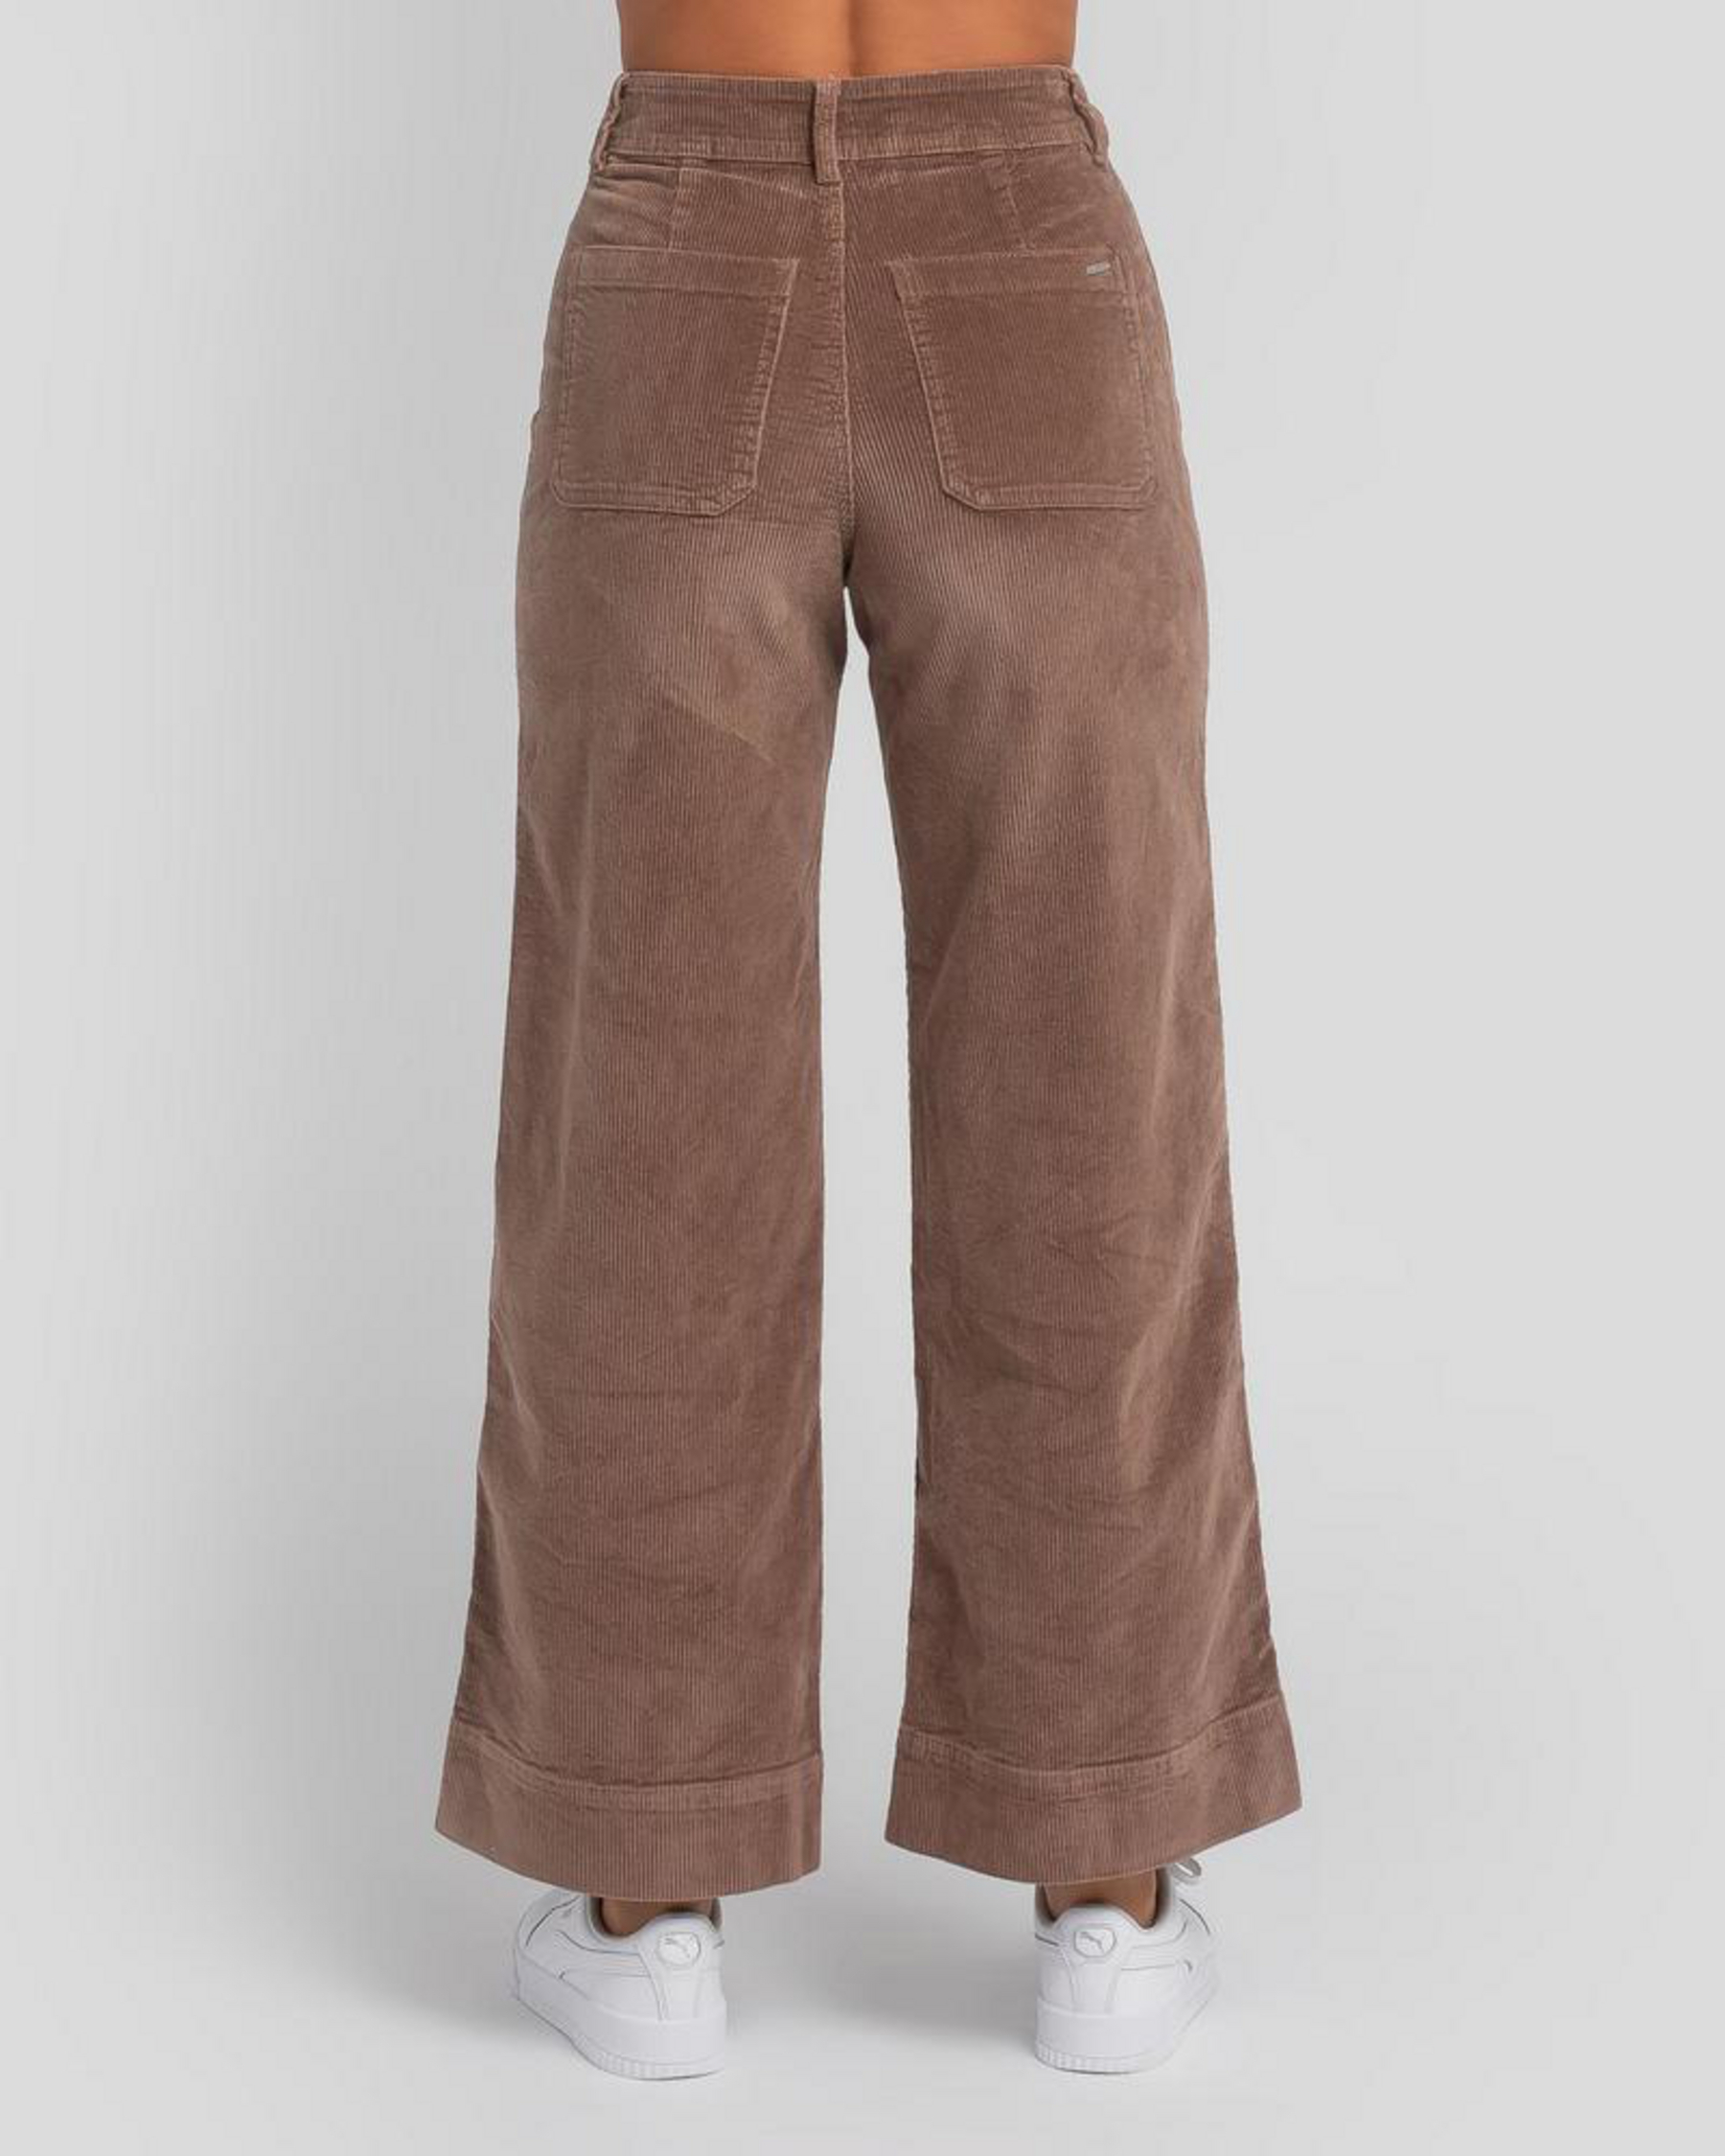 Shop Ava And Ever Georgia Pants In Milk Chocolate - Fast Shipping ...